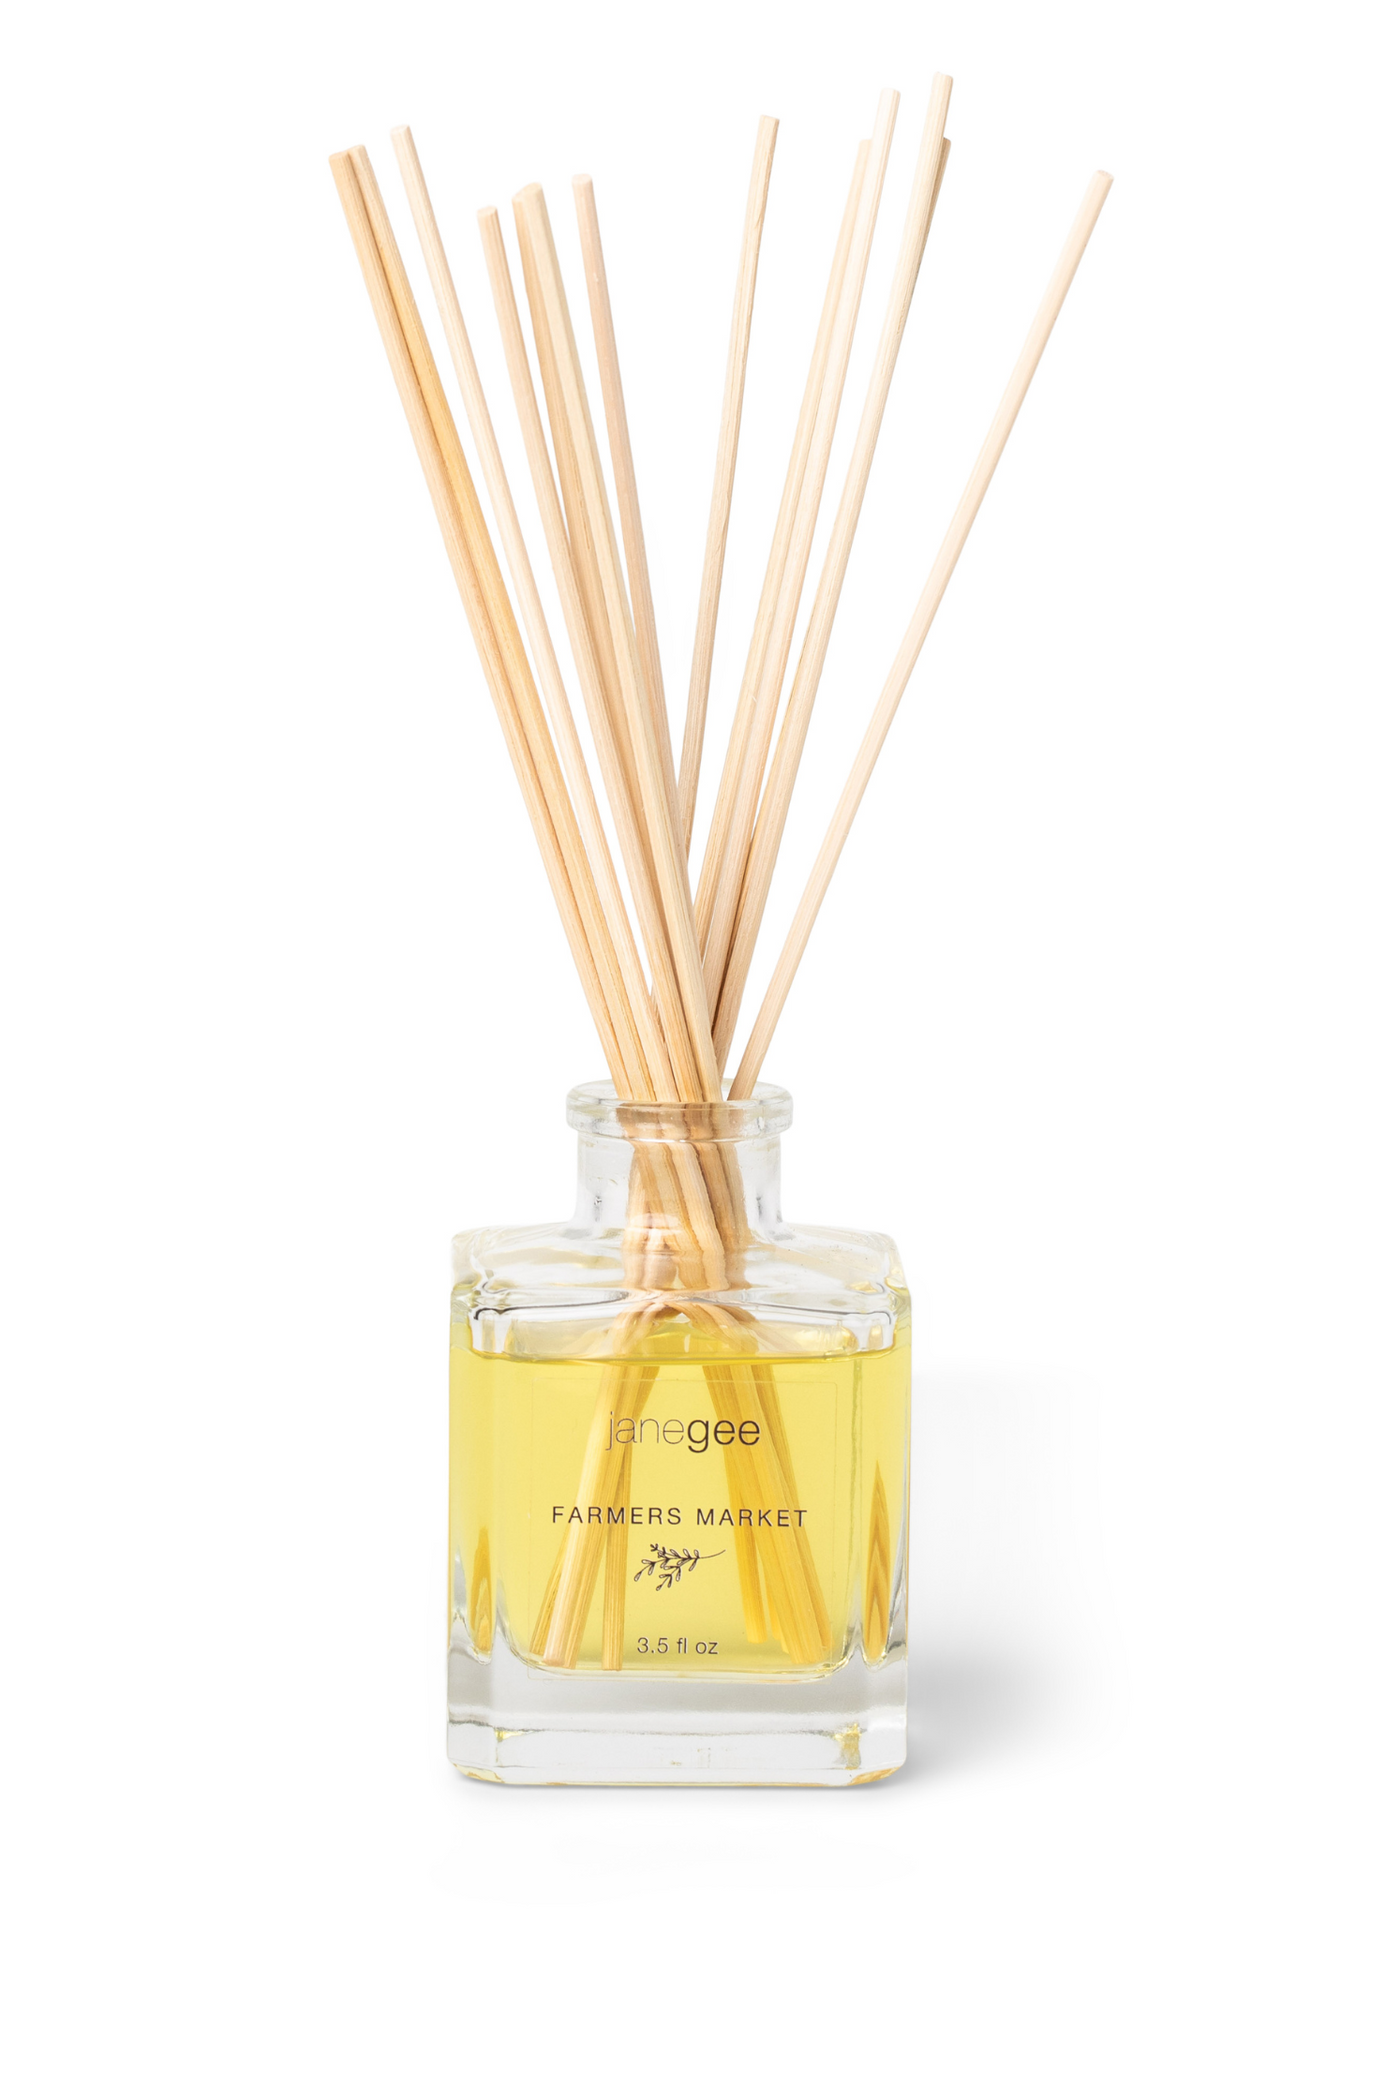 janegee Farmers Market Reed Diffuser